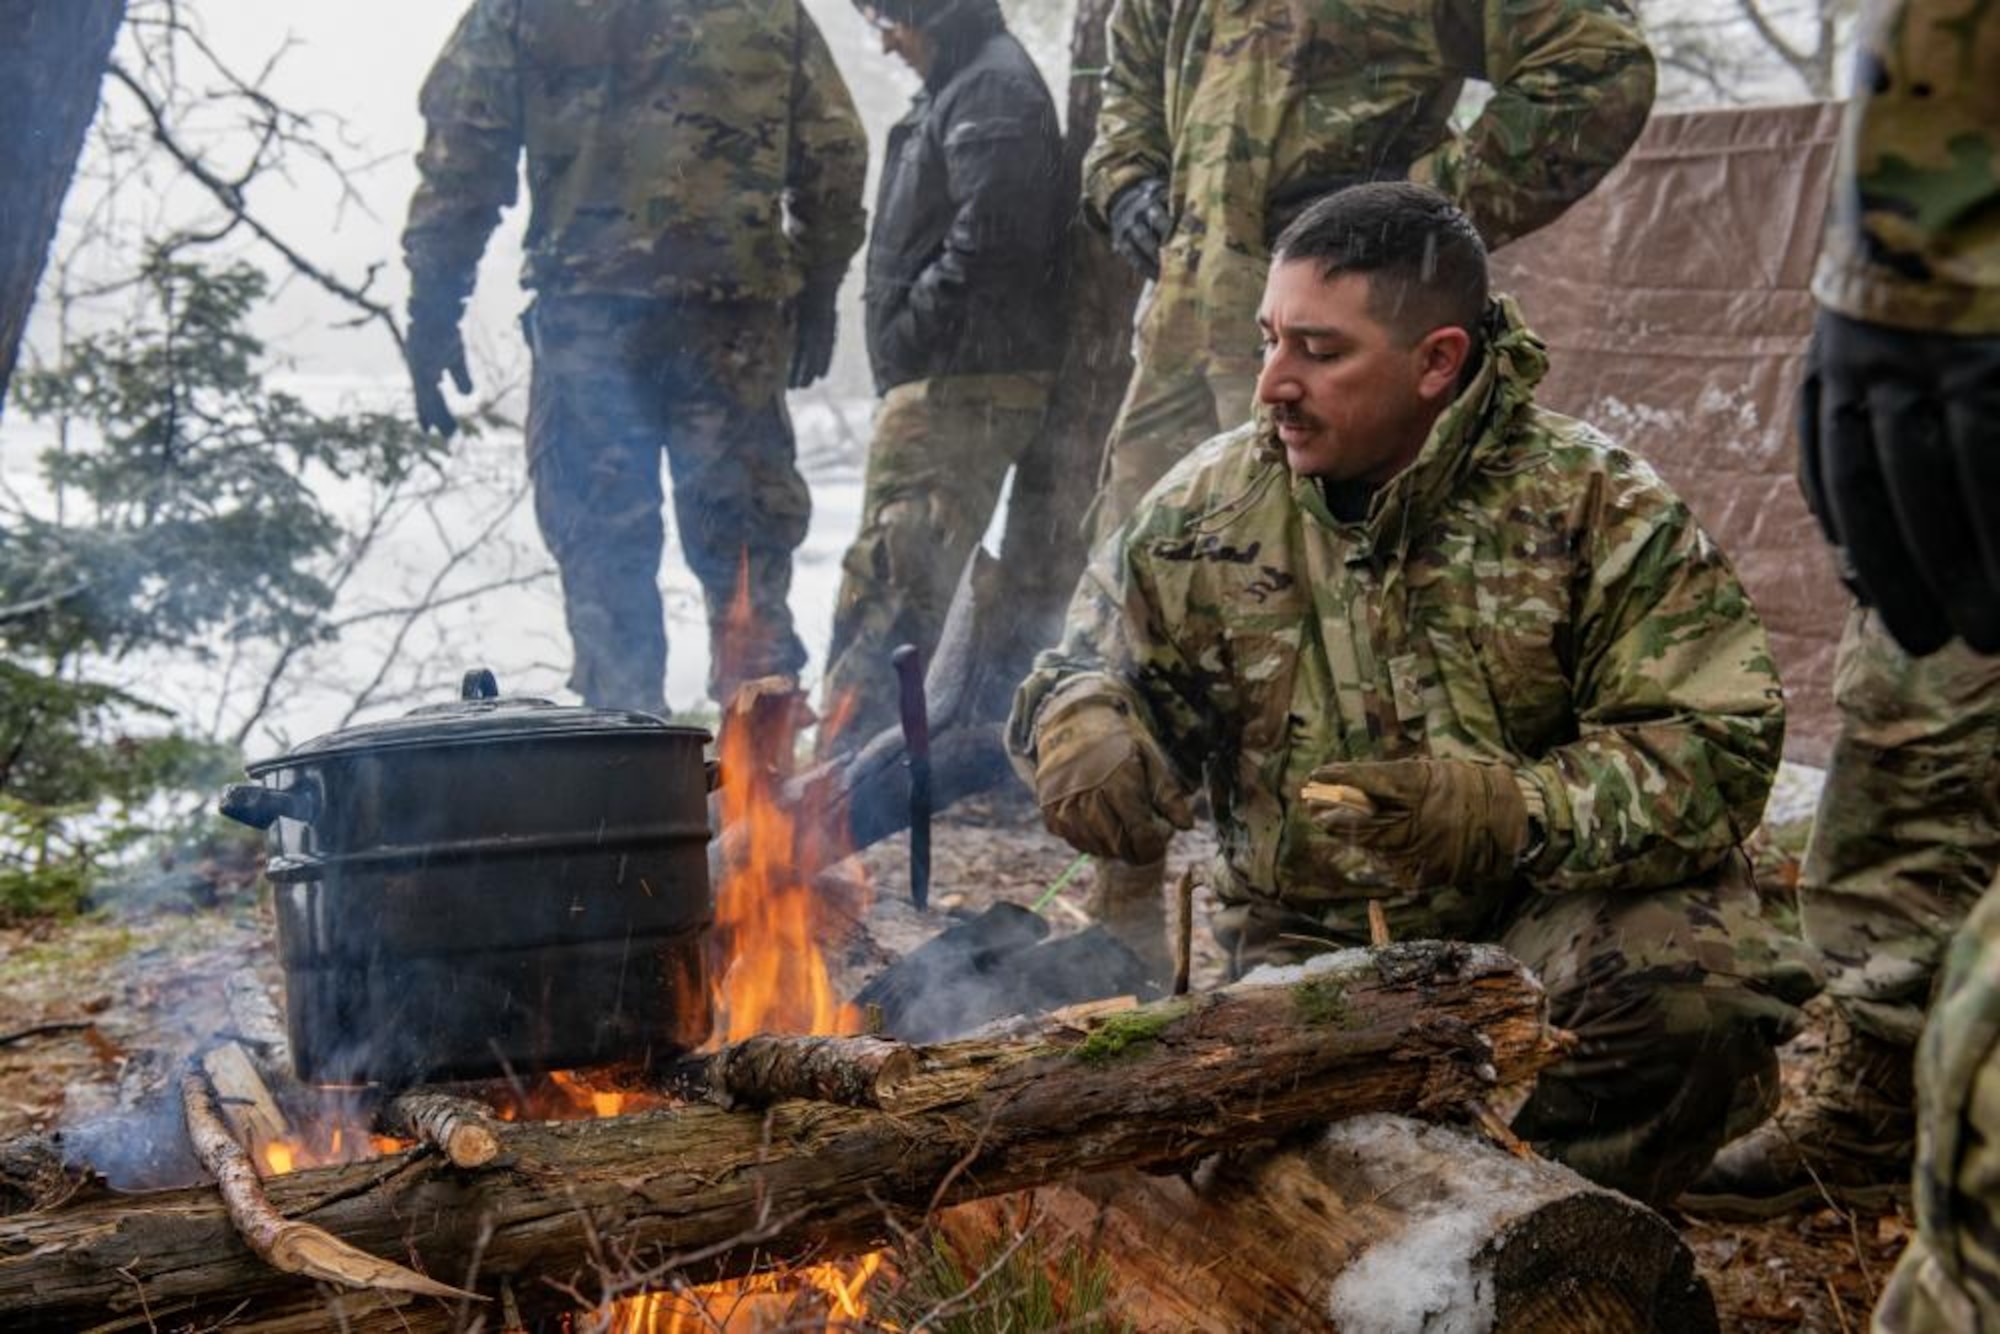 U.S. Air Force Senior Airman Louis Delgardio, of the 290th Joint Communications Support Squadron, boils water over a campfire Feb. 9, 2023, at Alpena Combat Readiness Training Center, Michigan. Airmen from the 290th are attending a class led by Survival, Evasion, Resistance and Escape (SERE) Specialists to teach them basic survival techniques in a cold weather environment. (U.S. Air National Guard photo by Senior Airman Jesse Hanson)